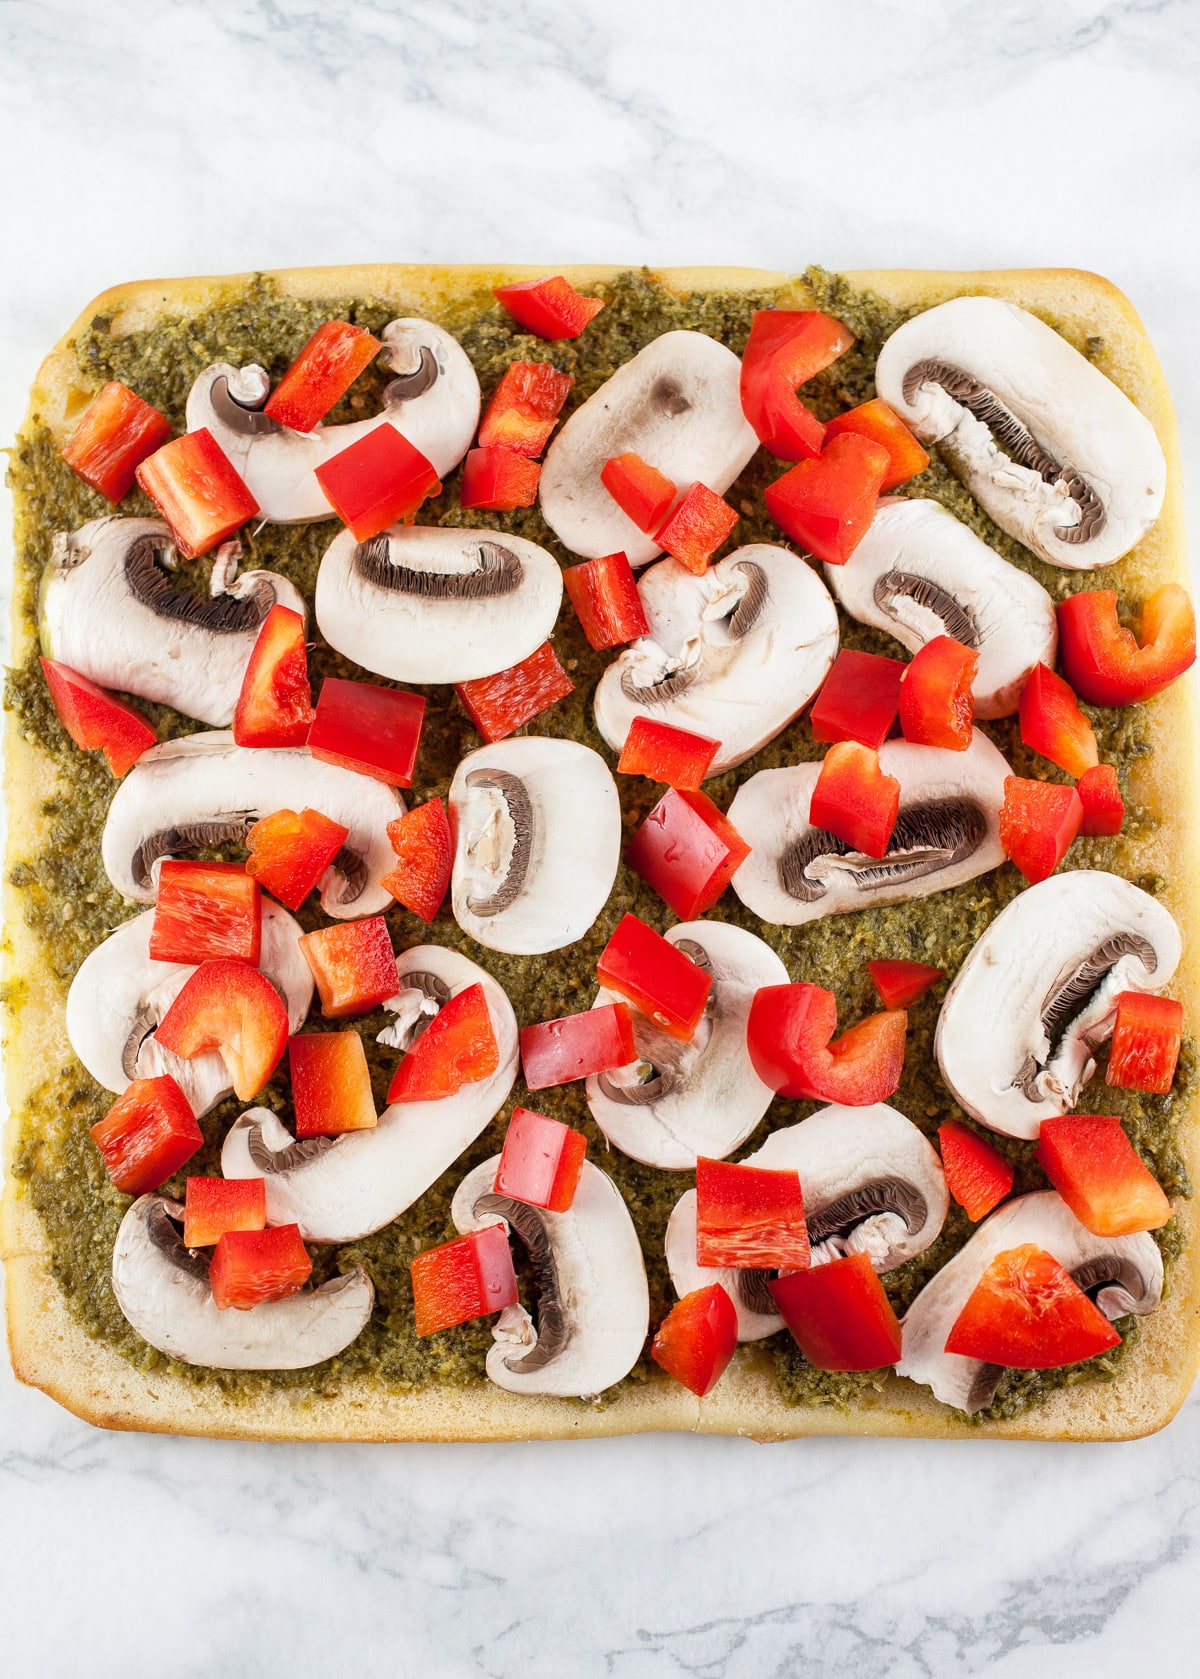 Pesto, red bell peppers, and mushrooms on uncooked flatbread.